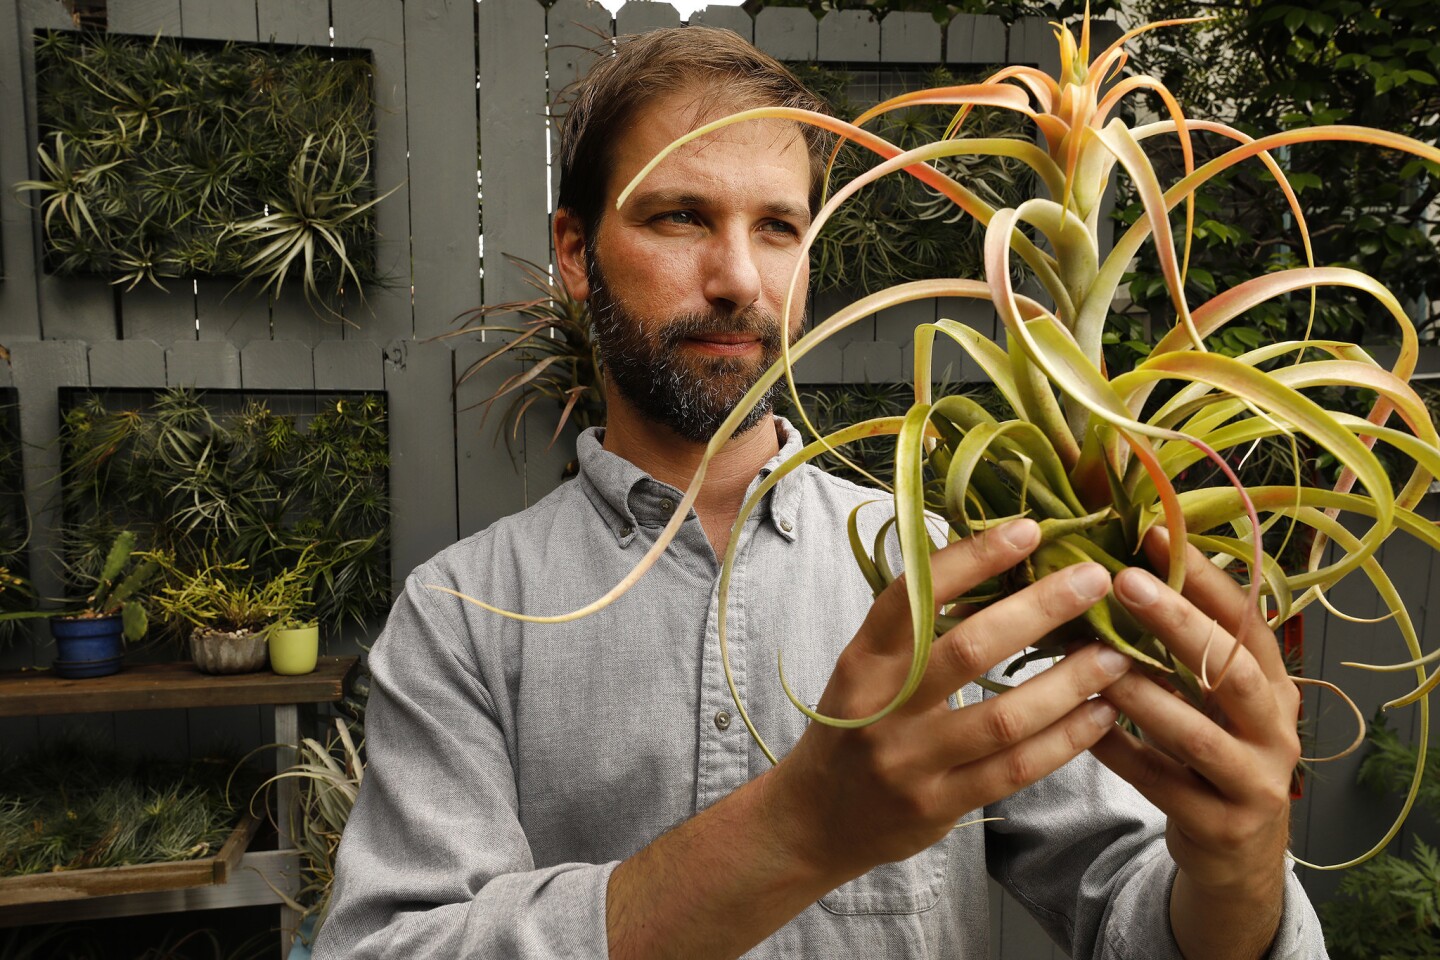 Rosen, a landscape architect in Mar Vista, founded Airplantman to explore creative alternatives to the typical glass cages and pieces of driftwood used for displaying them. Here's a closer look at some of his favorite airplants: